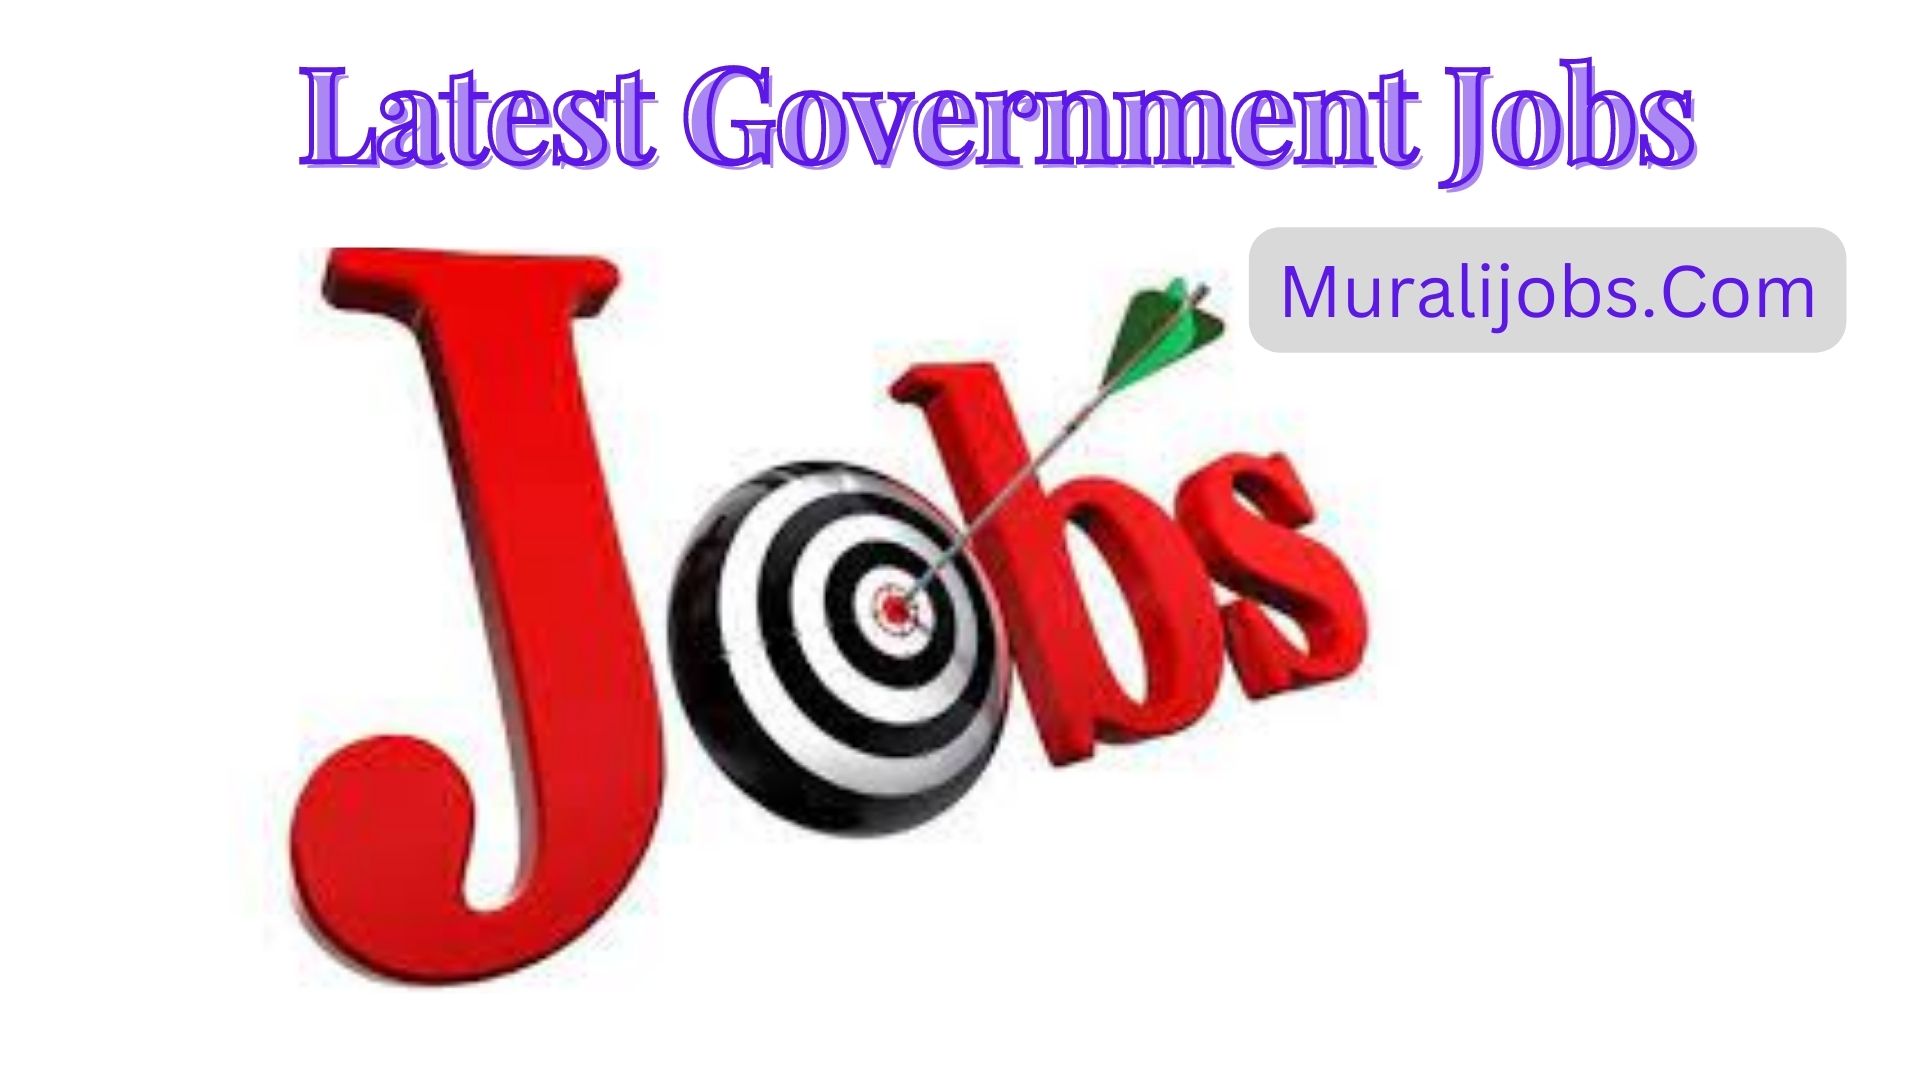 Latest Govt Jobs By Category